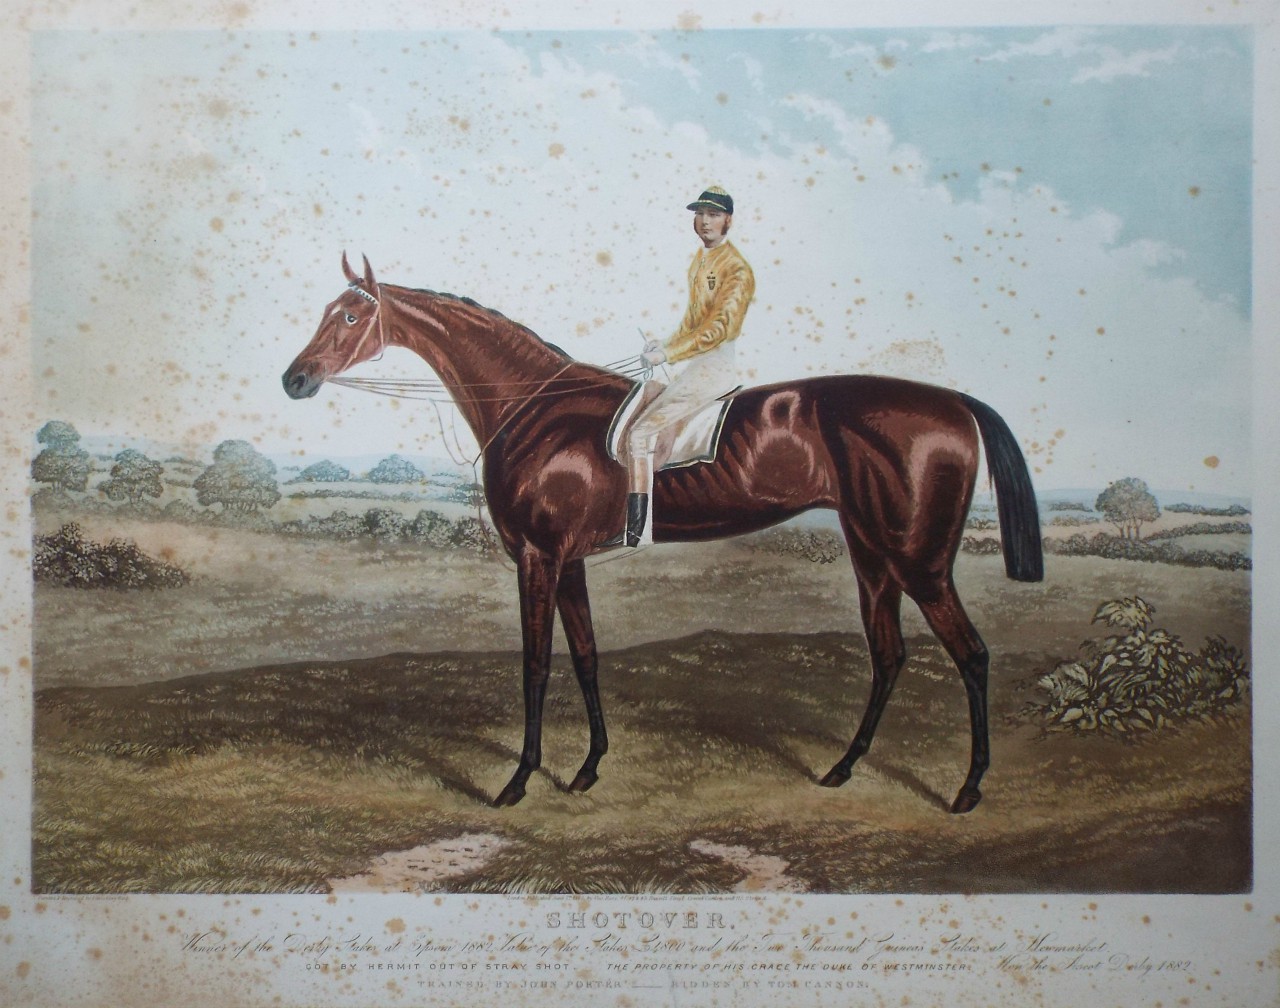 Aquatint - Shotover, 
Winner of the Derby stakes at Epsom 1882, Value of the stakes £4,800 and the Two Thousand Guineas Stakes at Newmarket.
Got by Hermit out of stray shot. The Property of his Grace the Duke of Westminster. Won the Ascot Derby 1882.
Trained by John Porter - Ridden by Tom Cannon. - Hunt